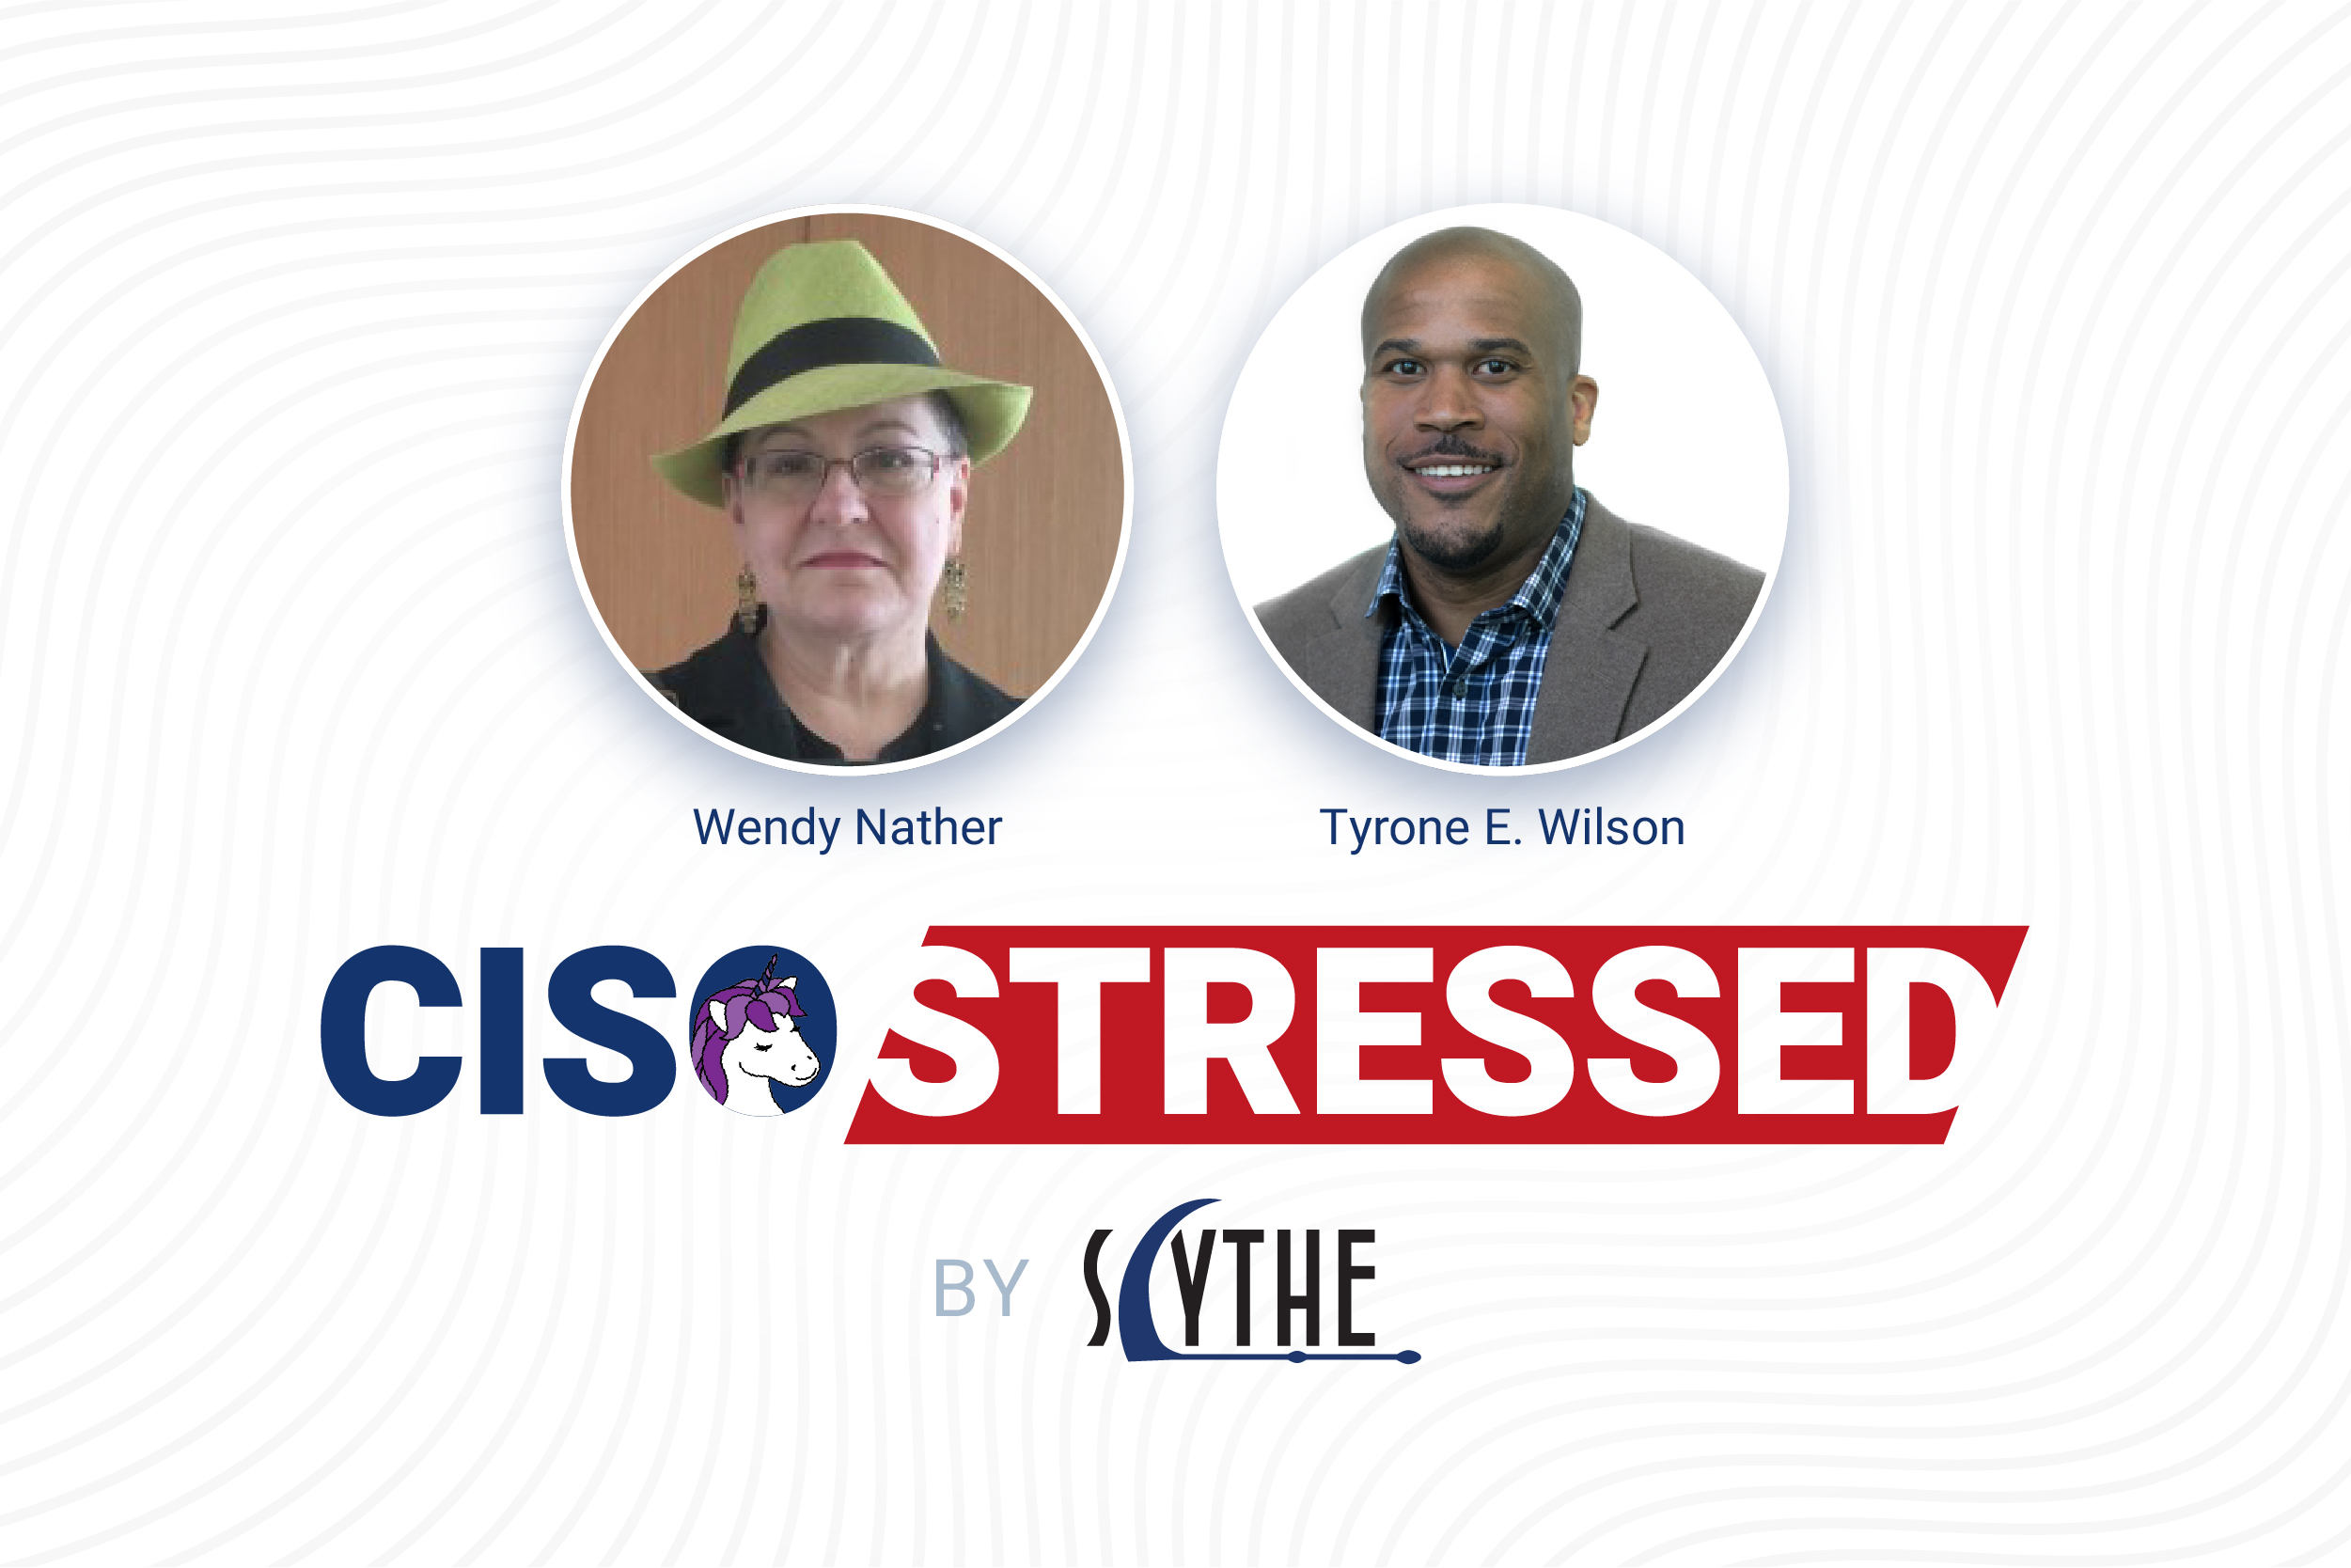 CISO Stressed Episode 1: Wendy Nather & Tyrone Wilson